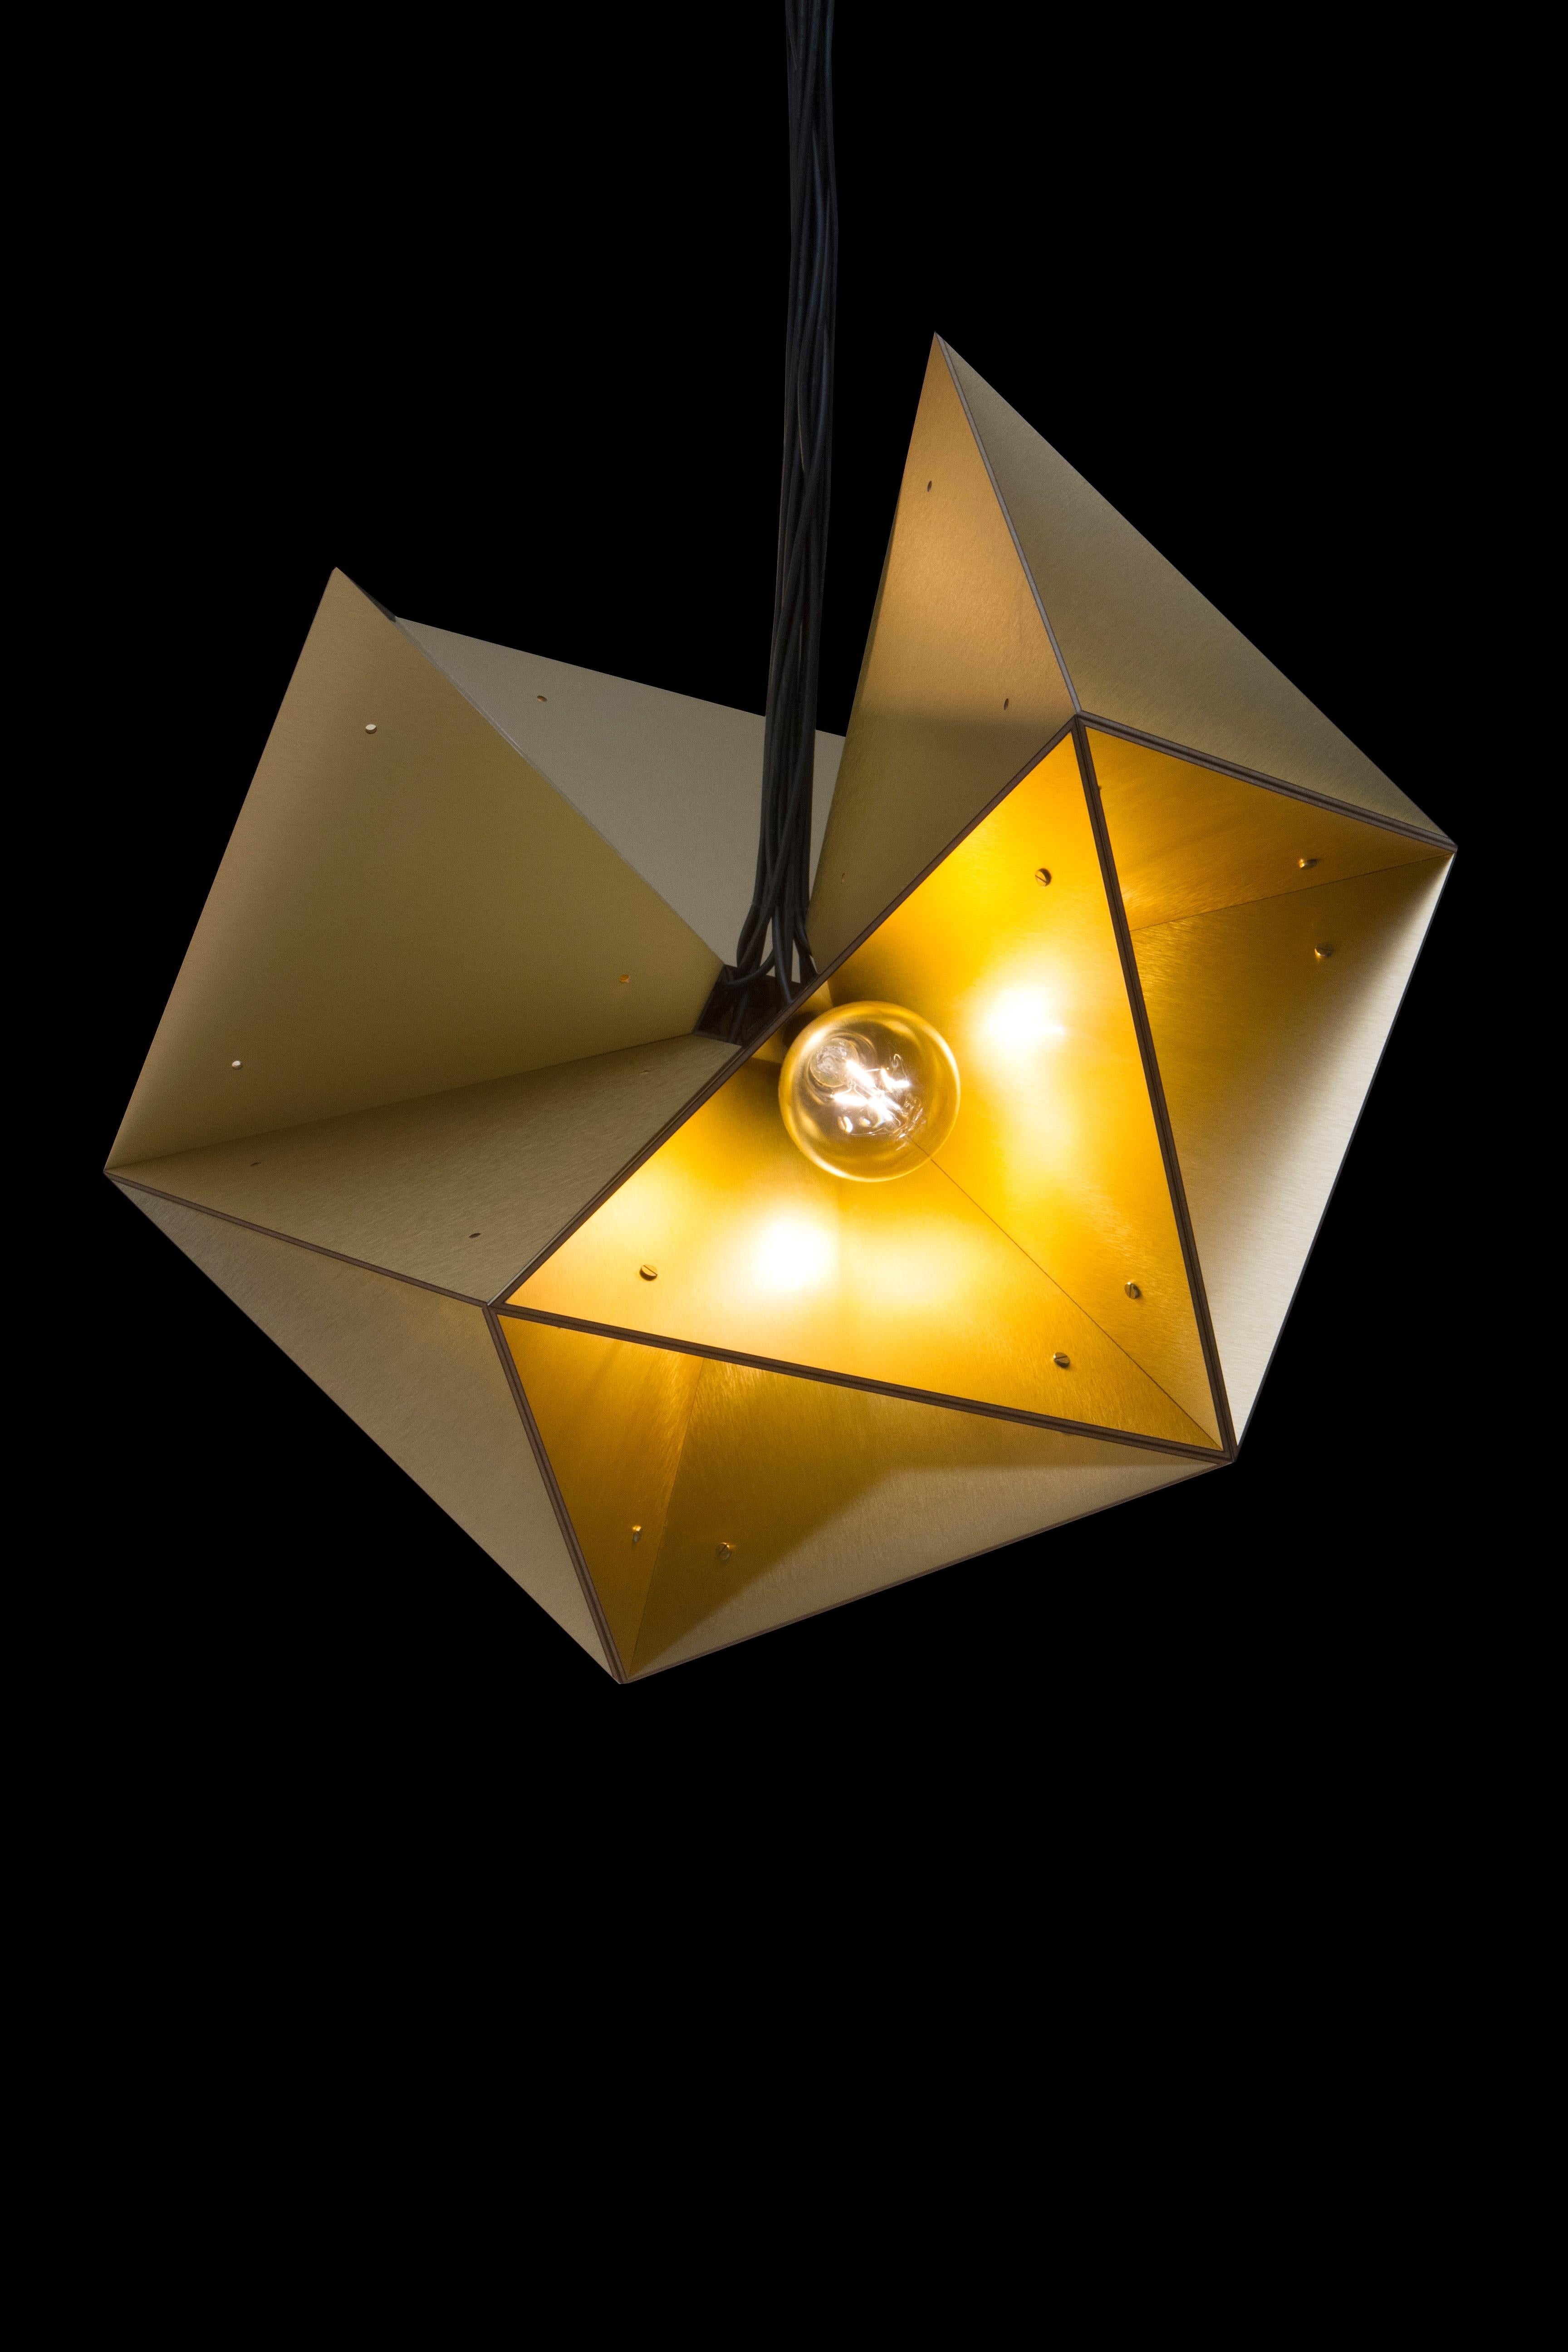 Modular laminated lamp in golden formica. Accompanied with canopla. This piece does not come with the lamp.

About 